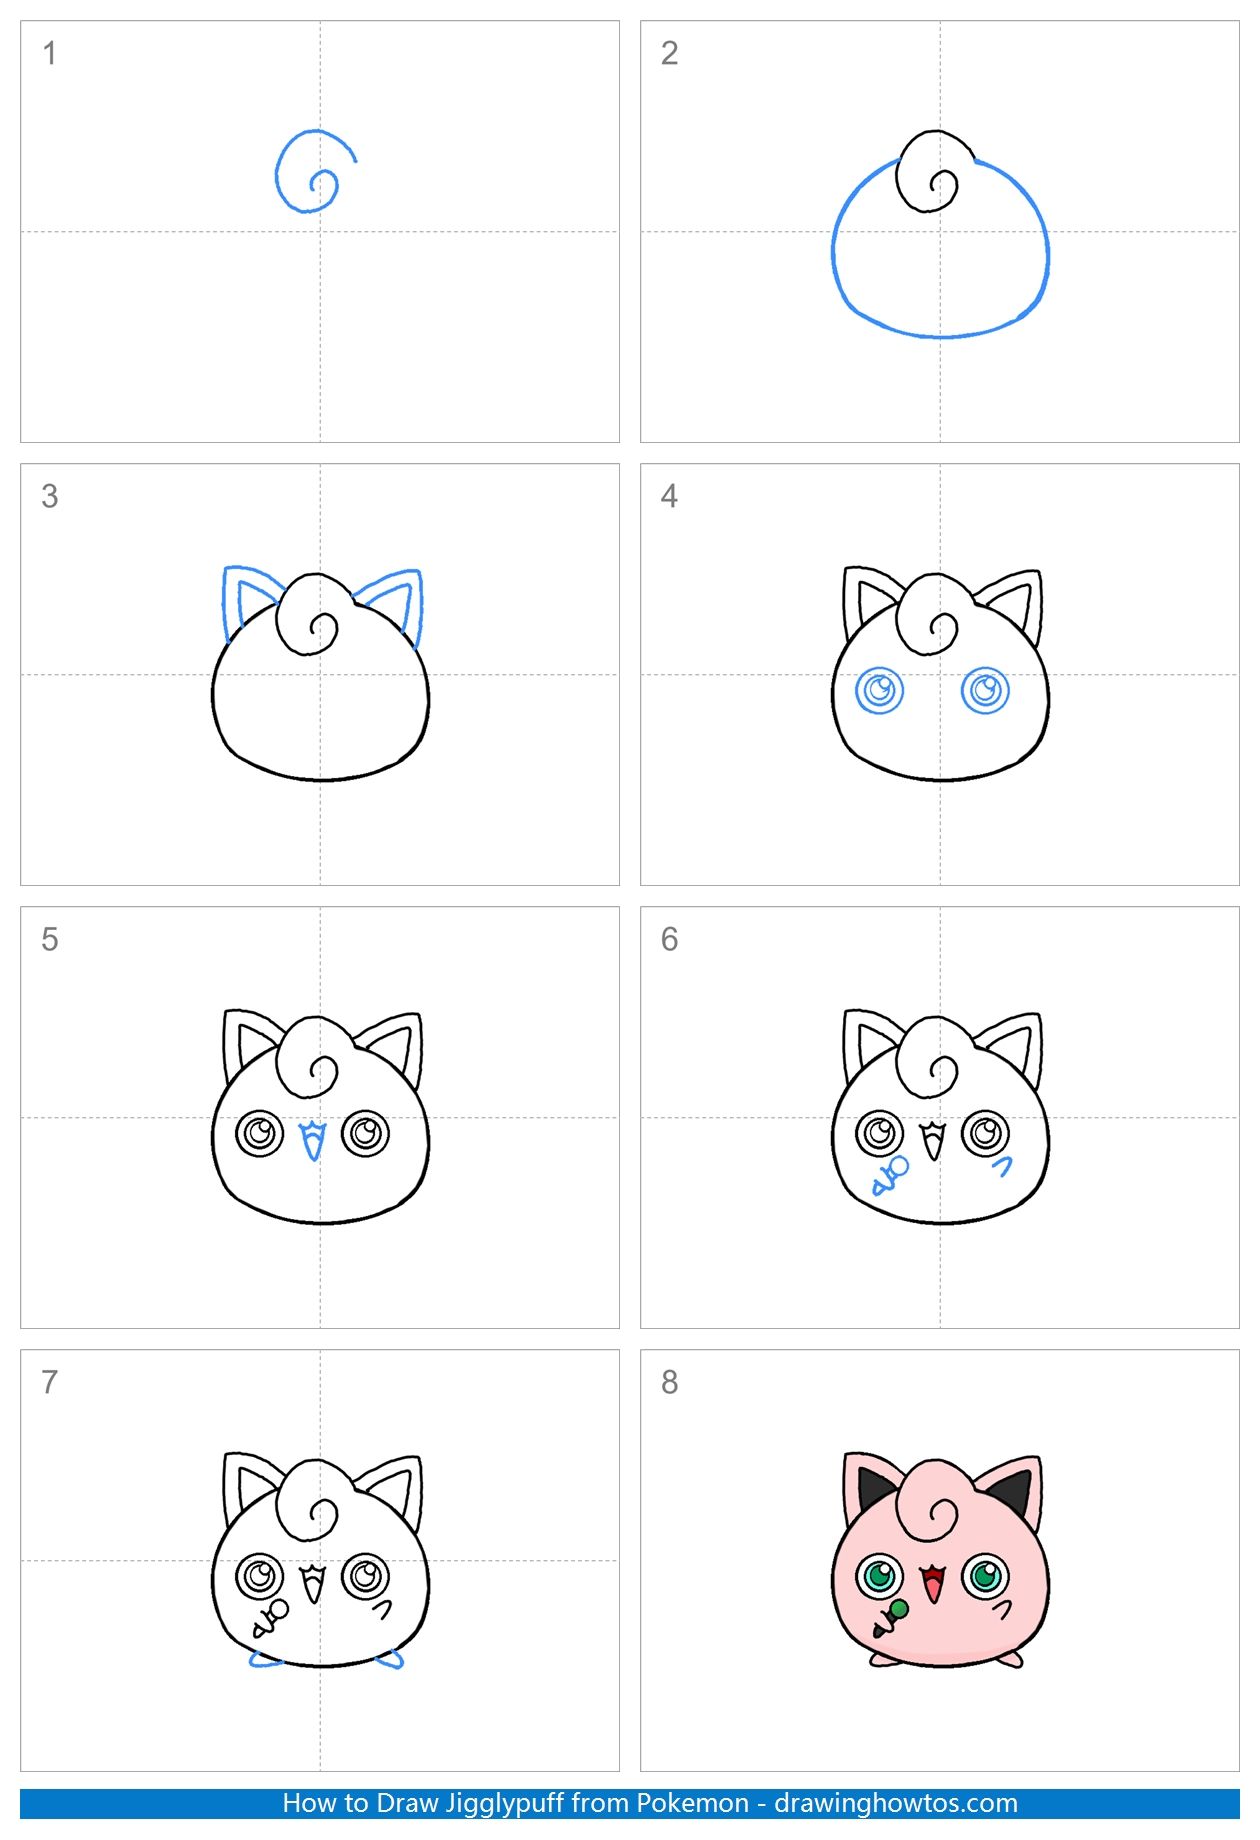 How to Draw Jigglypuff from Pokemon Step by Step